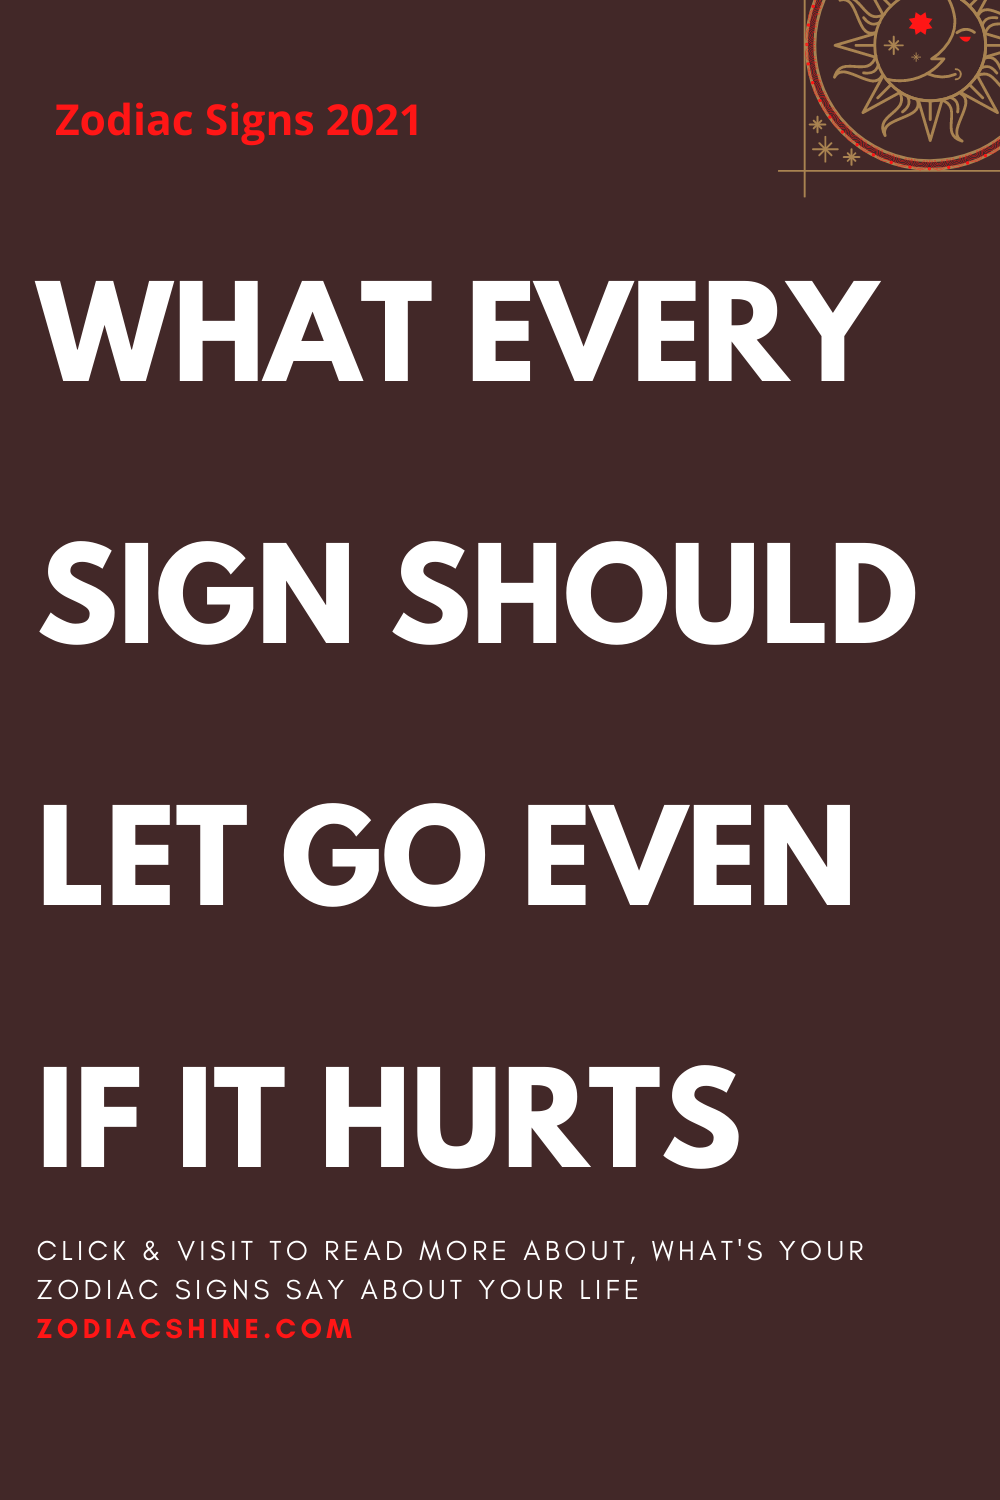 WHAT EVERY SIGN SHOULD LET GO EVEN IF IT HURTS